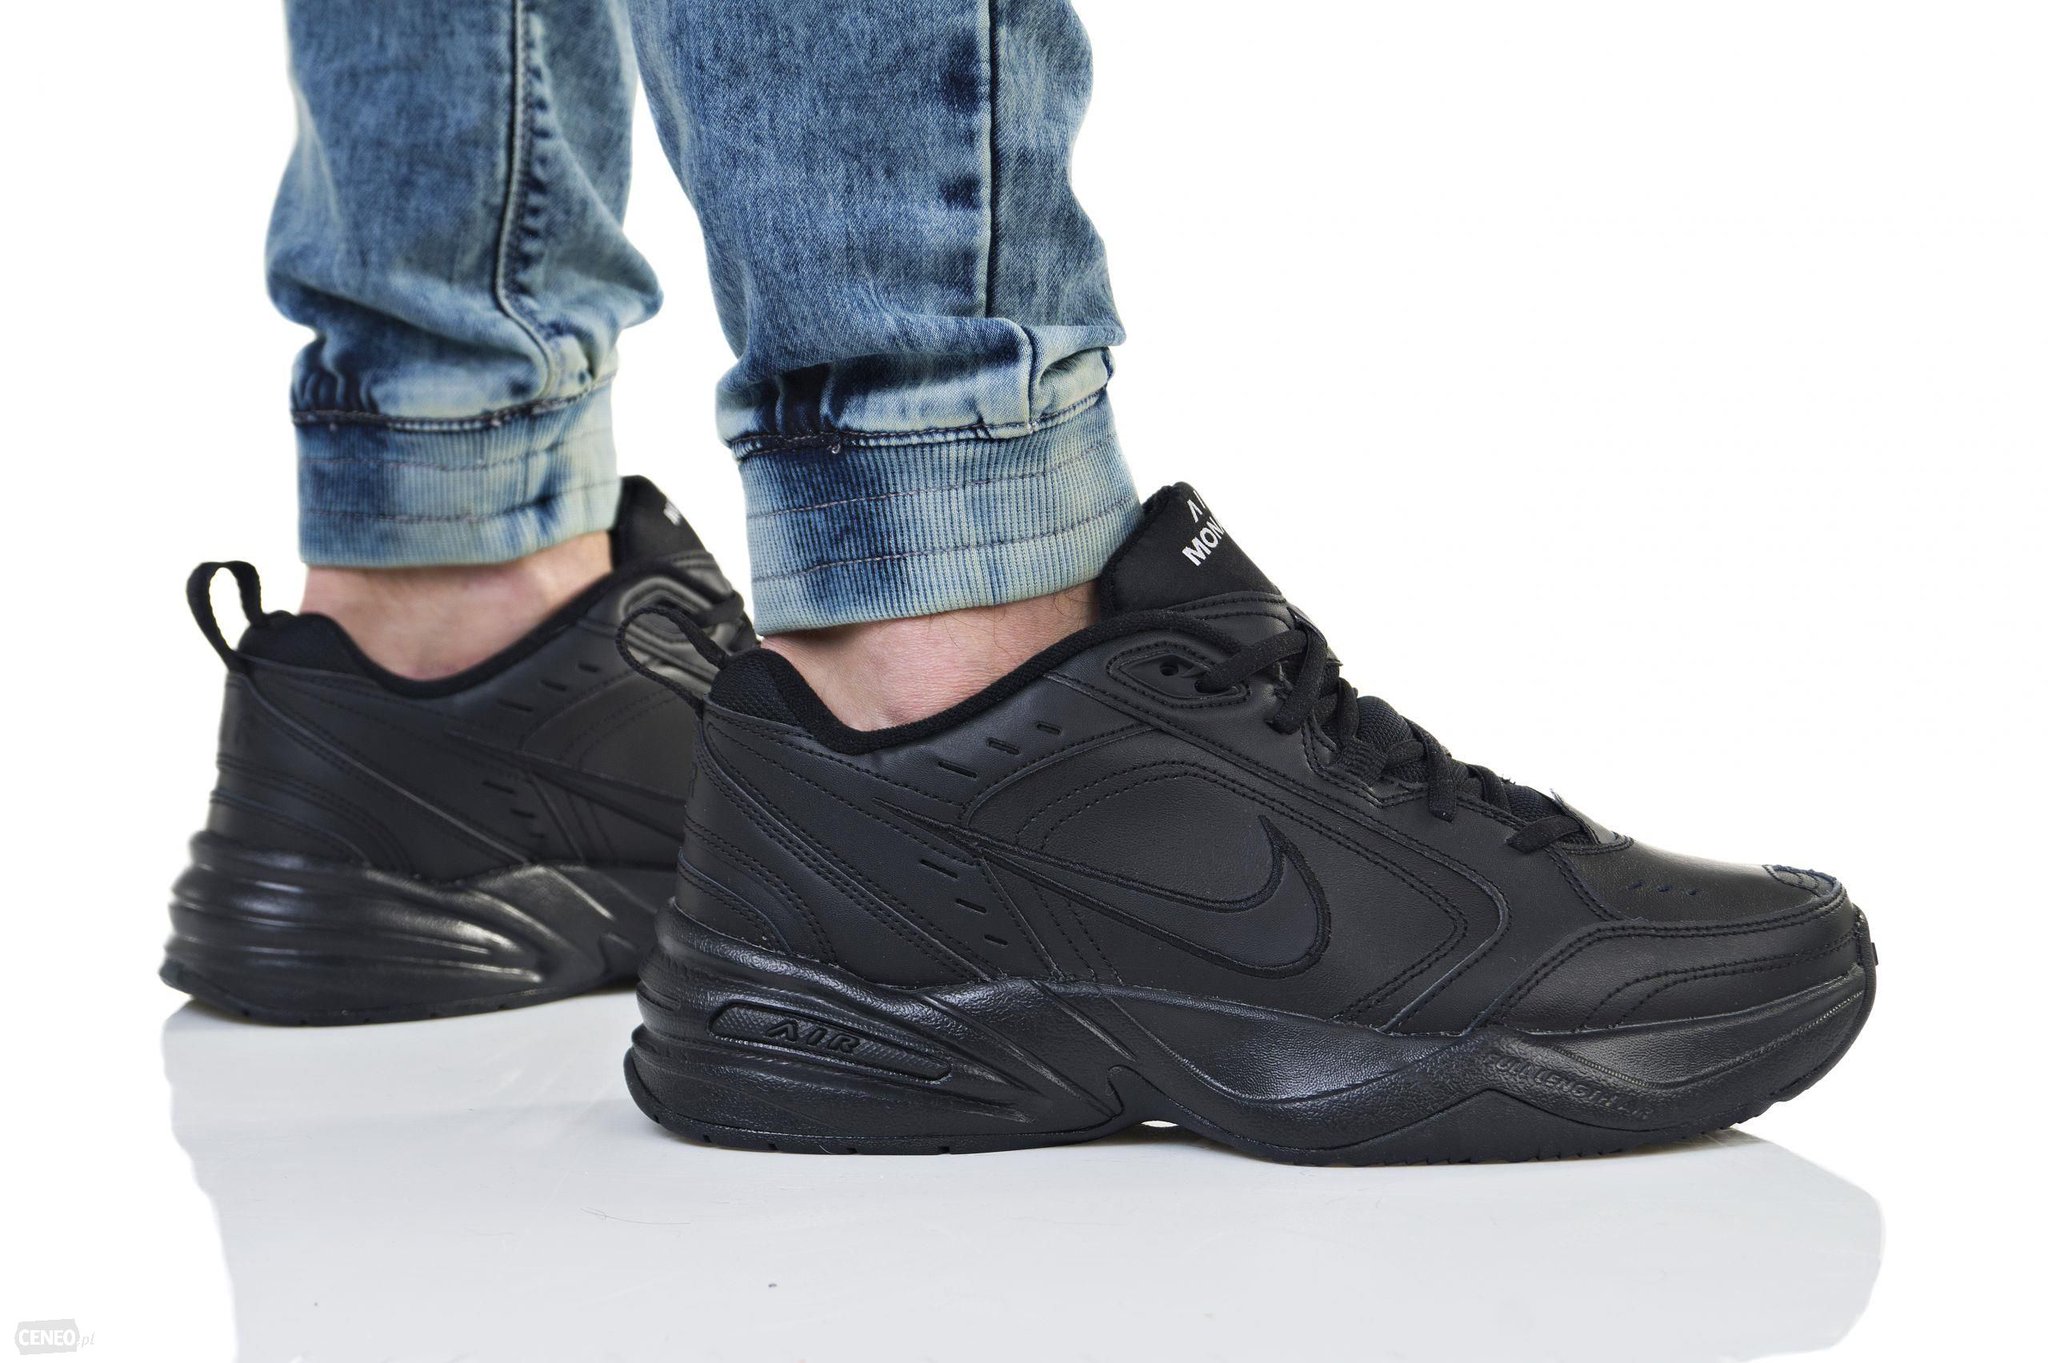 Solelinks Gift For Dads Look No Further And Grab The Nike Air Monarch Iv For Only 39 18 Each Free Shipping Use Code summer T Co Om6nupkm9r T Co Xv3teubeqb